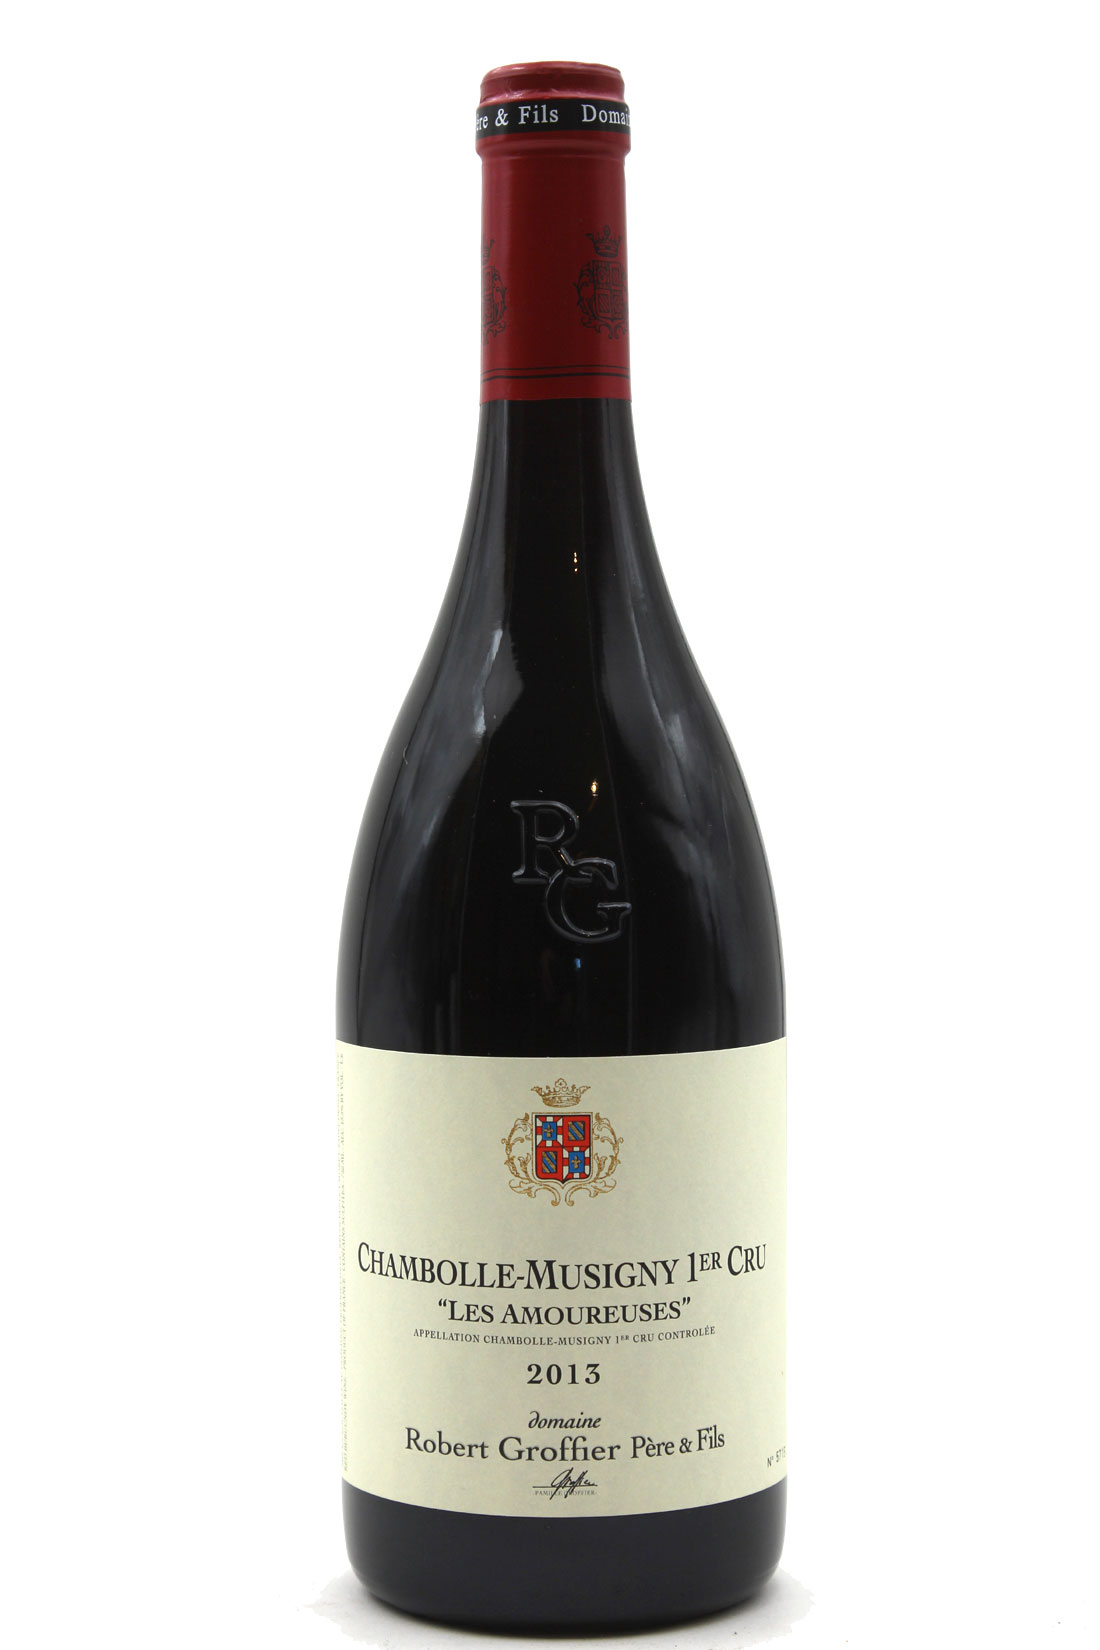 Chambolle-Musigny 1er Cru 2013 Les Amoureuses - Domaine Robert Groffier - Rouge - 75cl